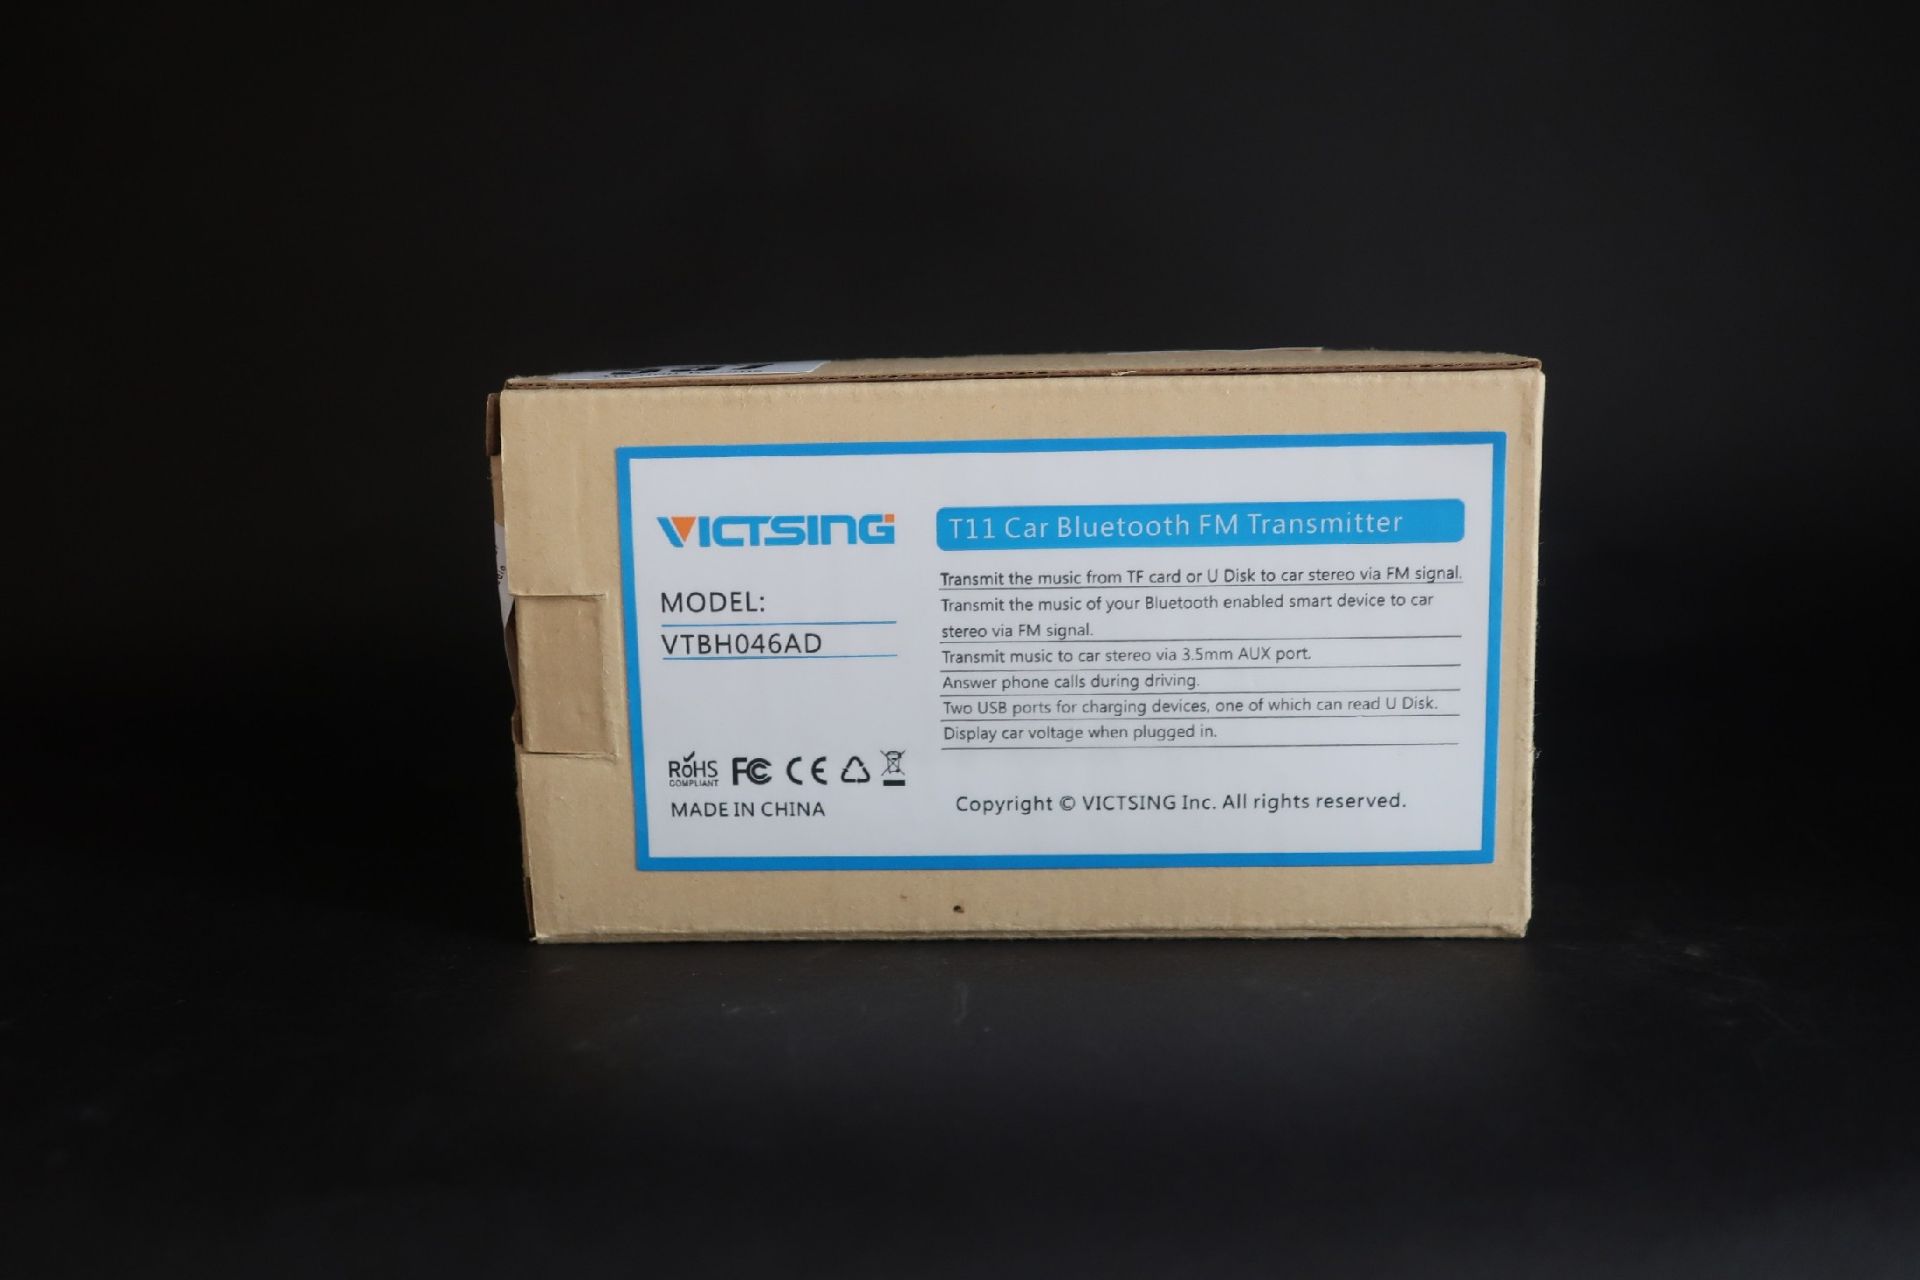 Fifteen boxed as new Victsing T11 Car Bluetooth FM Transmitters (Model: VTBH046AD).